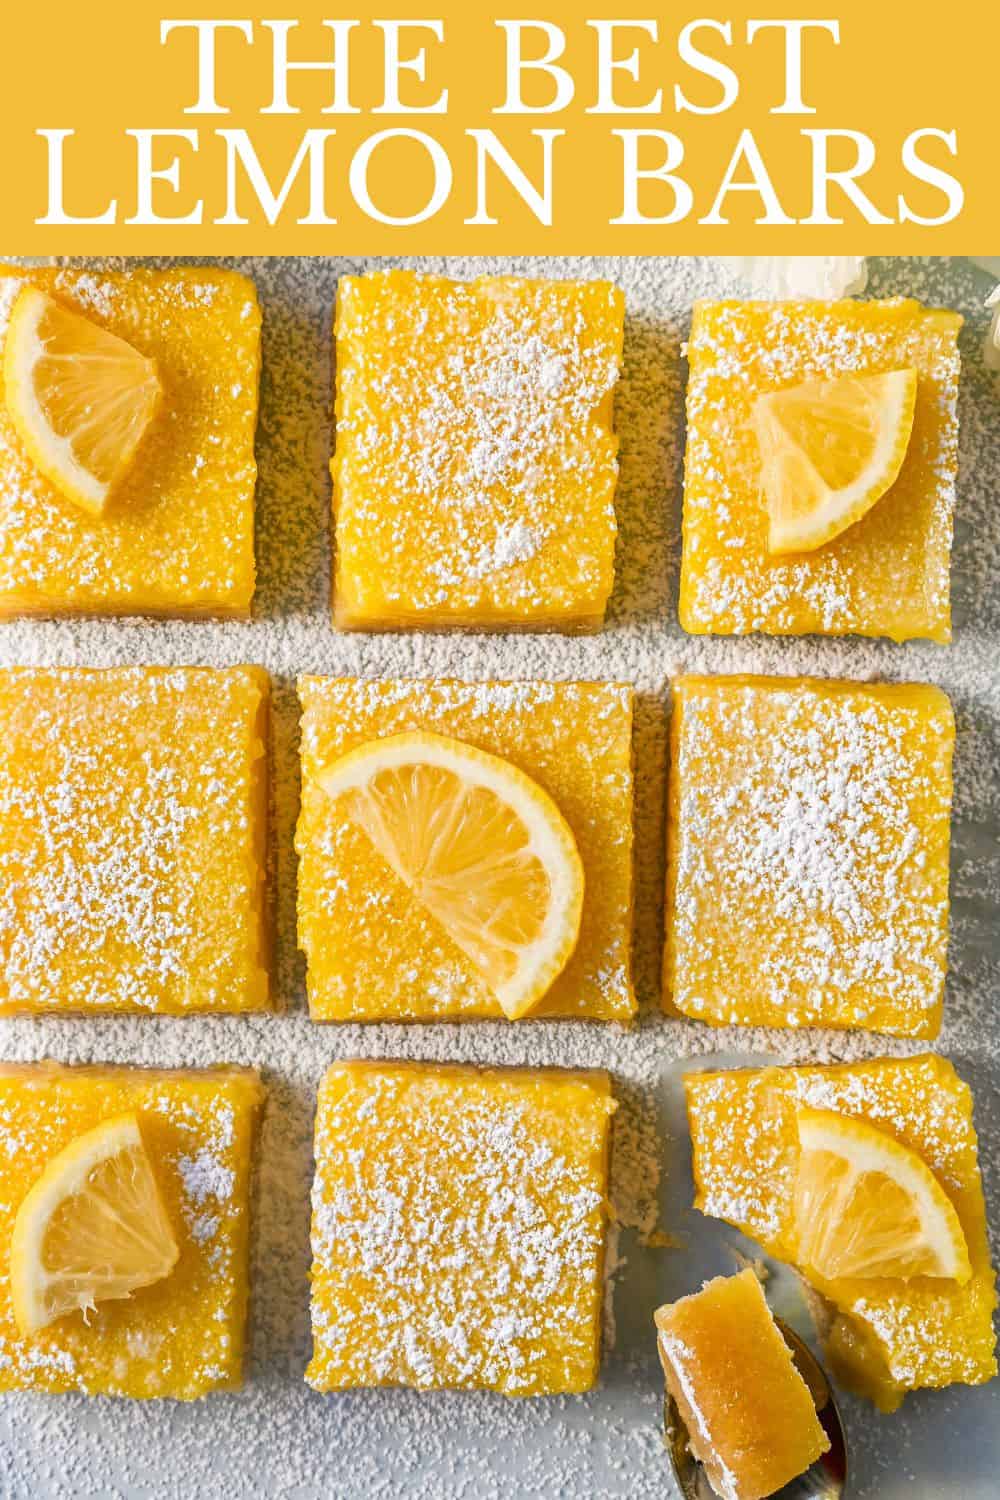 Lemon Bars. These classic lemon bars are made with tangy and sweet lemon curd and a buttery shortbread crust. If you love lemon desserts, you will love this lemon bar recipe. How to make the perfect lemon bar!